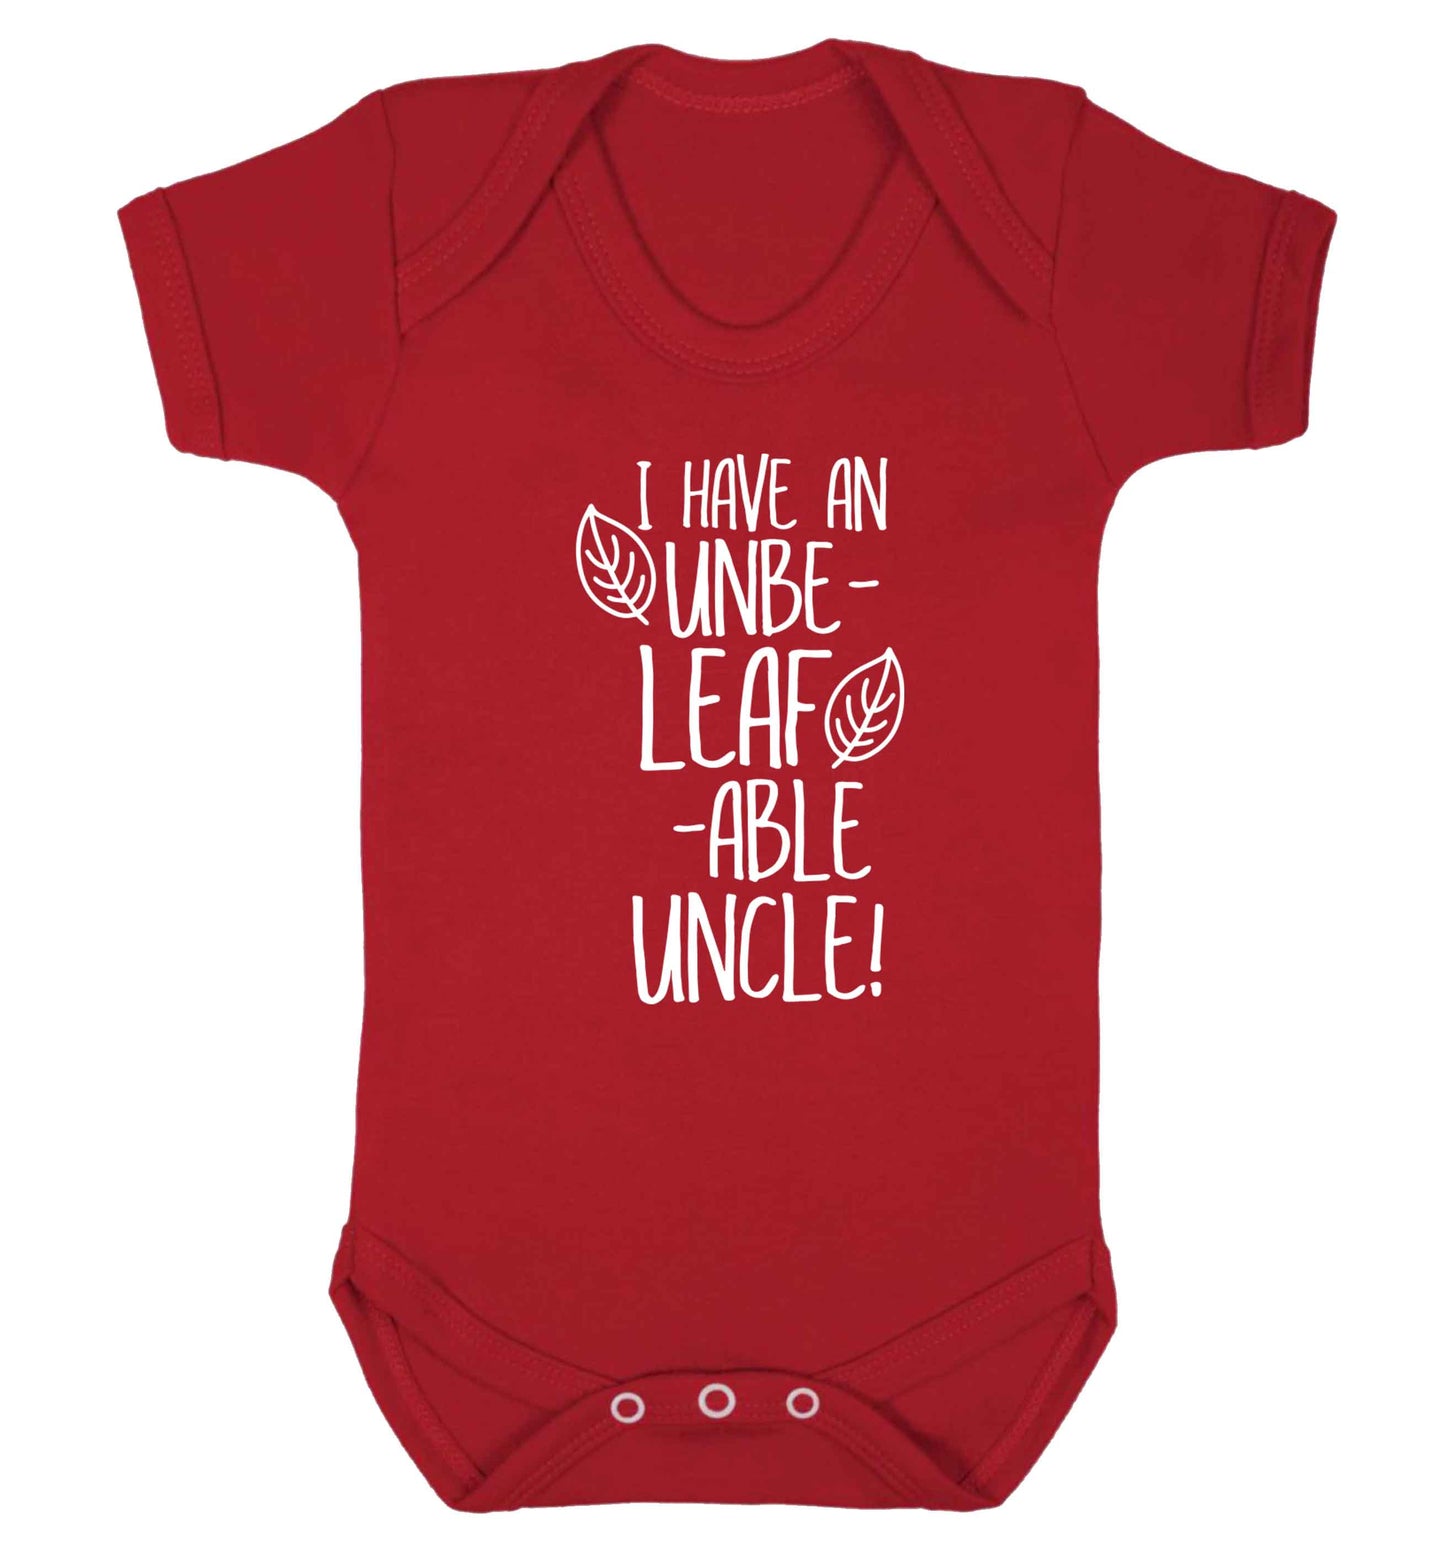 I have an unbe-leaf-able uncle Baby Vest red 18-24 months